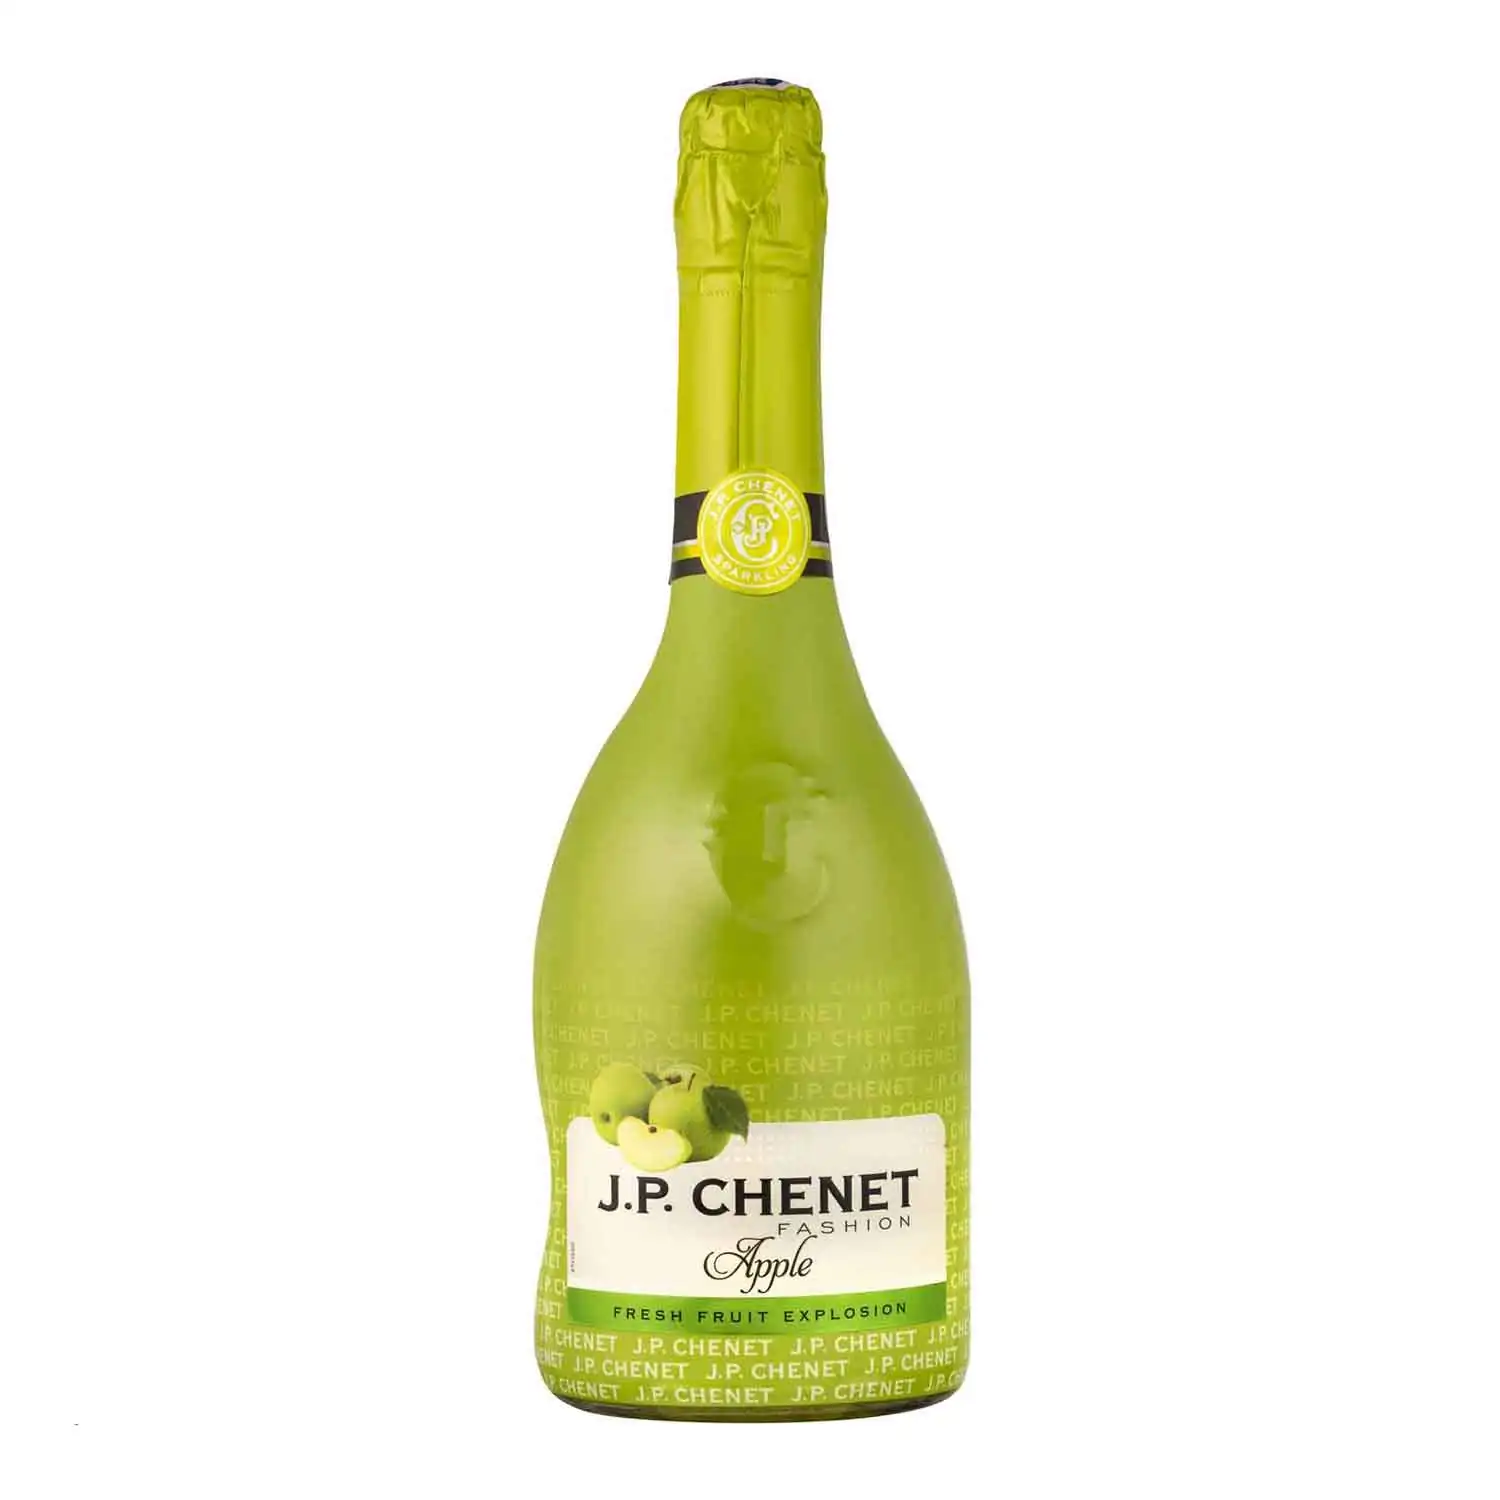 JP Chenet fashion pomme 75cl Alc 12% - Buy at Real Tobacco